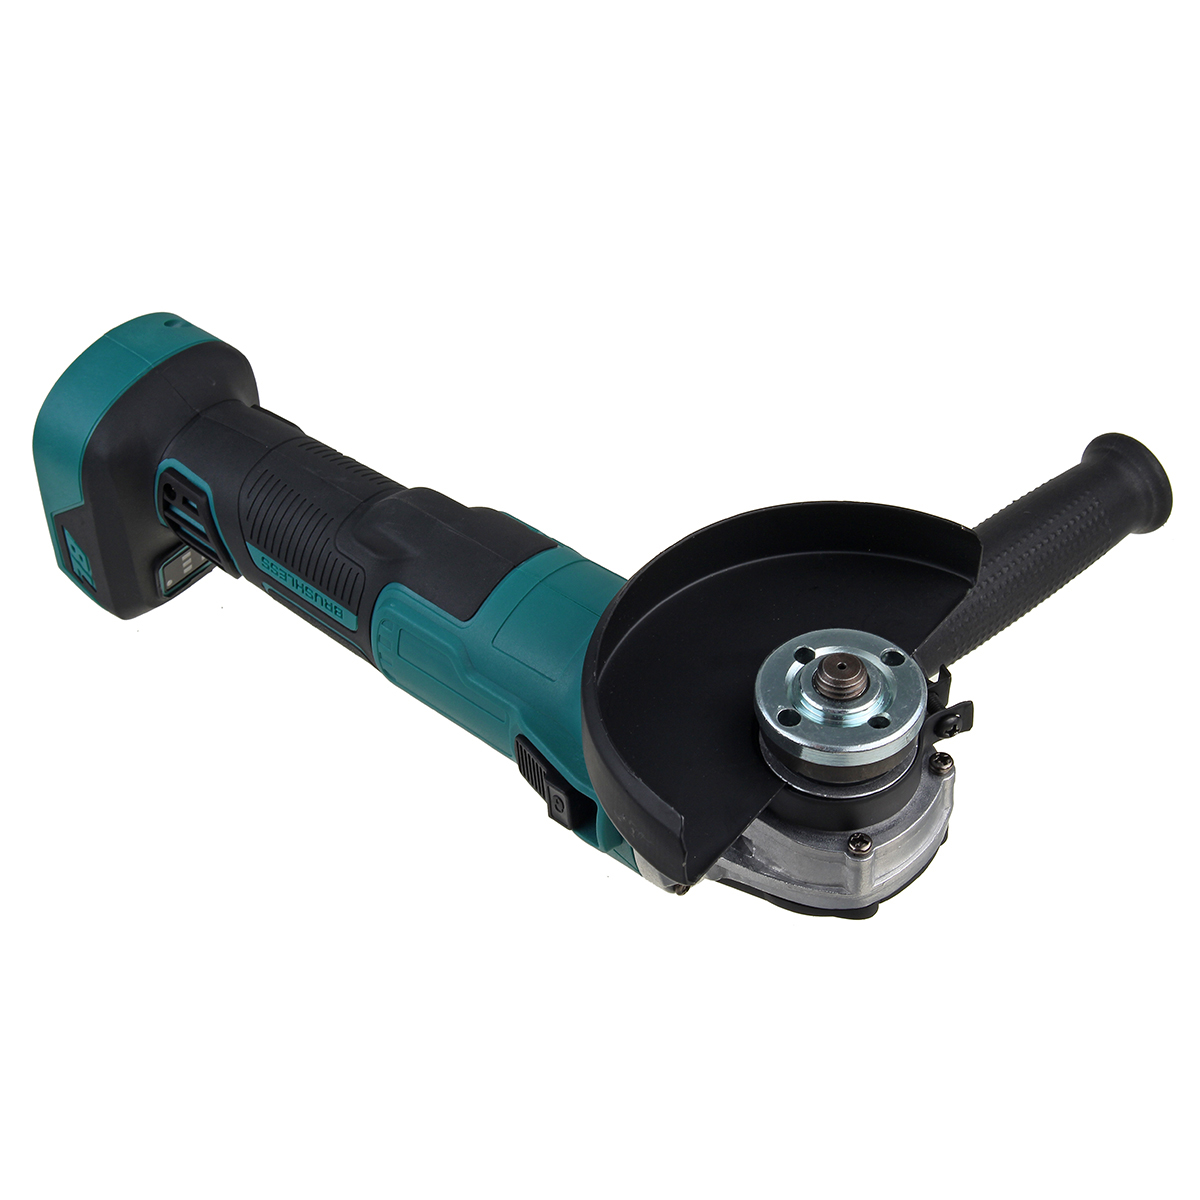 125mm-800W-Cordless-Brushless-Angle-Grinder-Cutting-Tool-Variable-Speed-Electric-Polisher-For-Makita-1825761-9